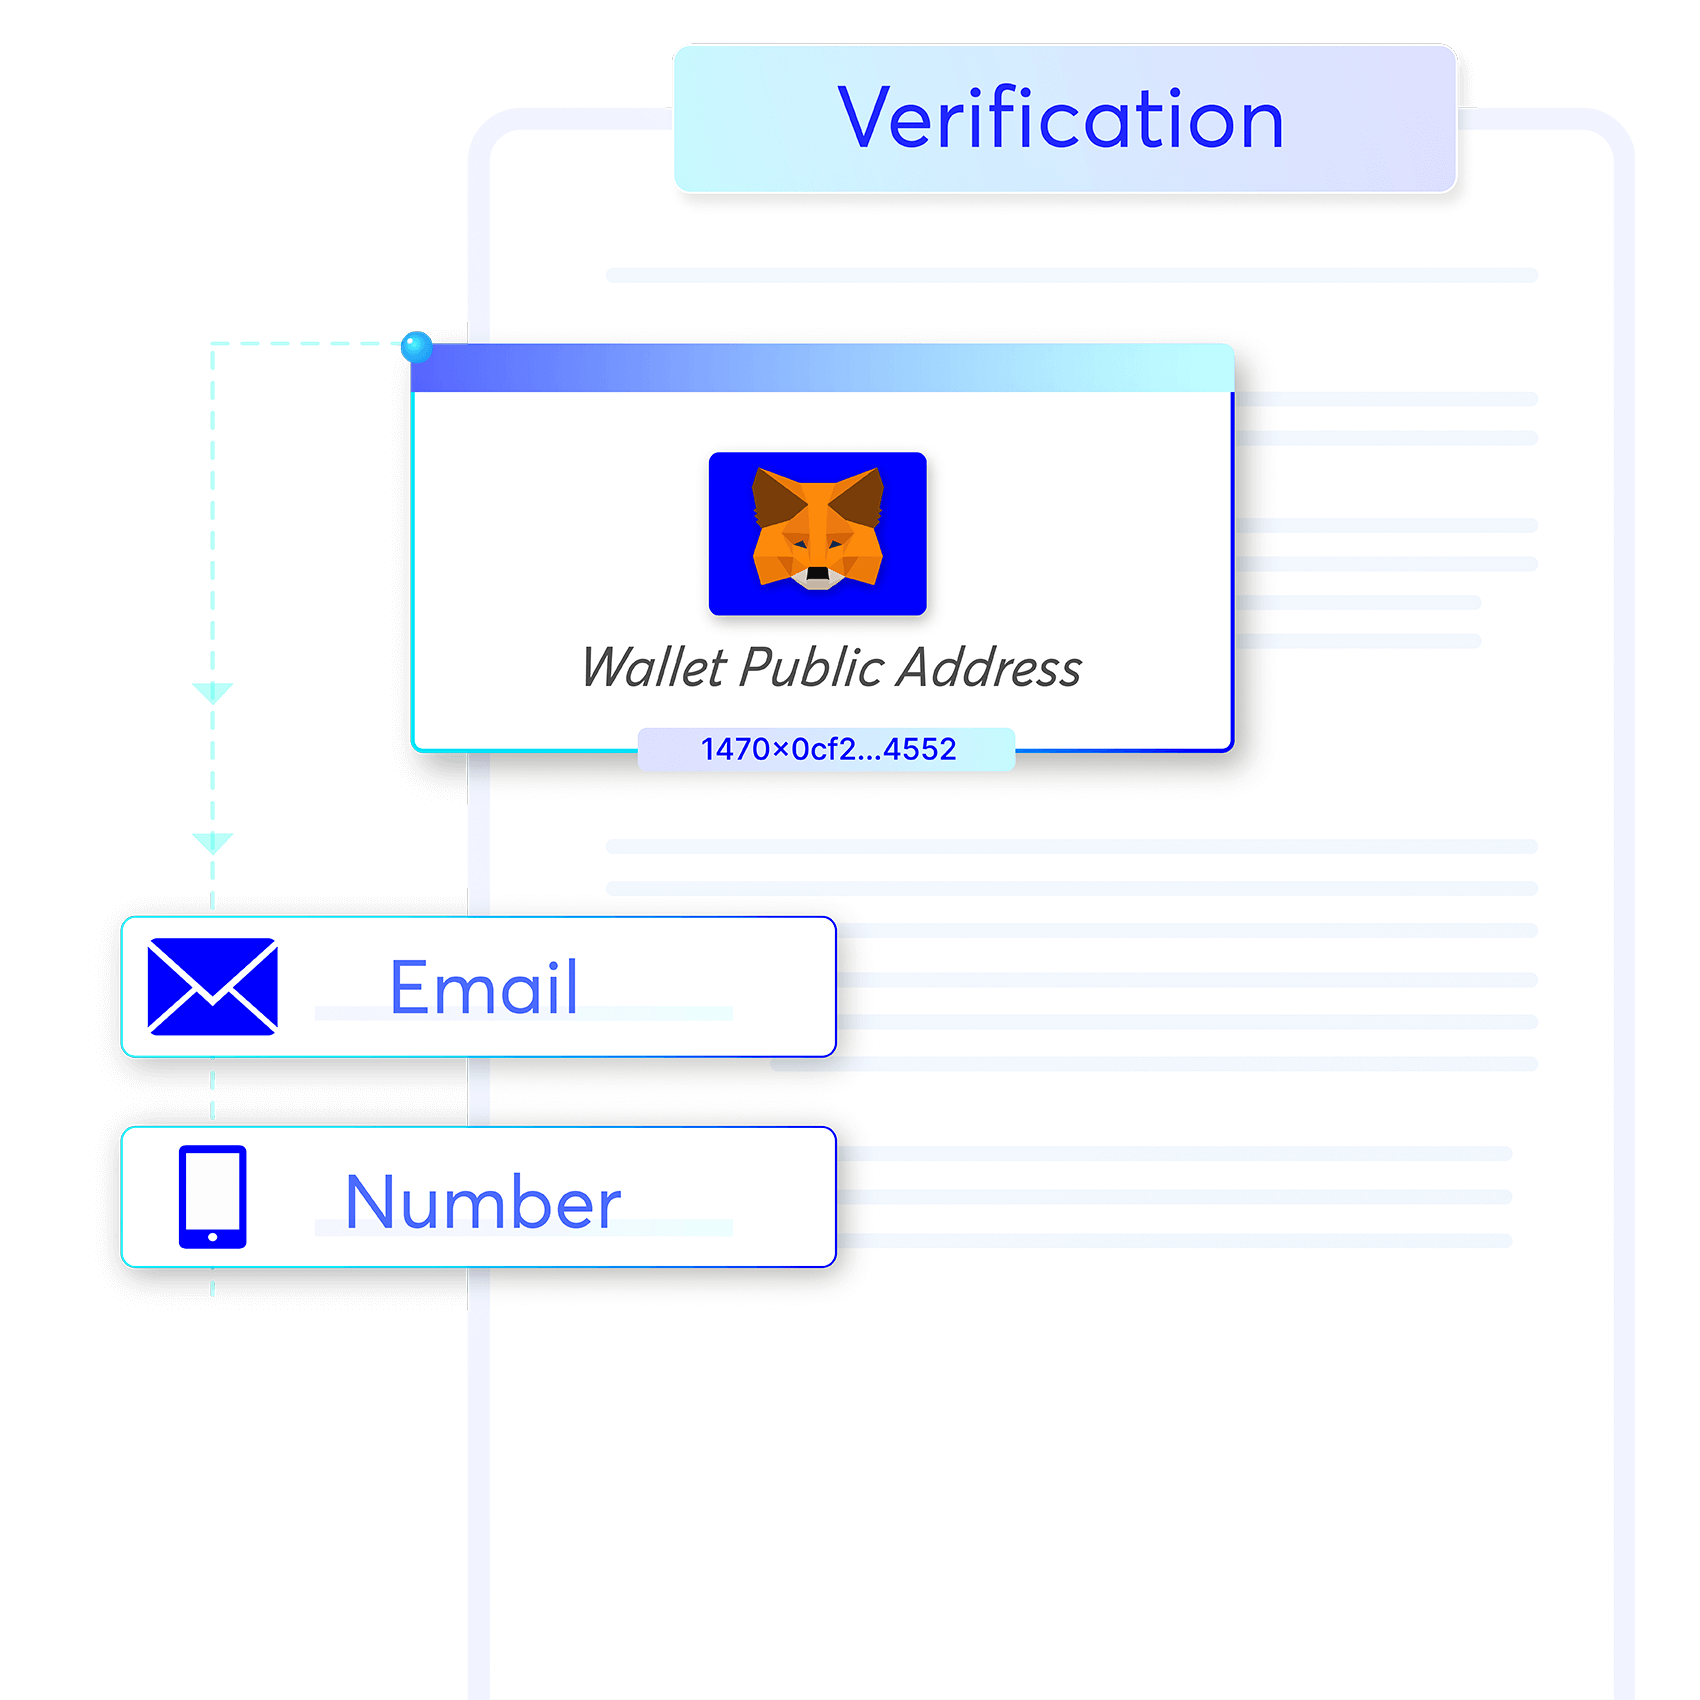 Revv provides three layers to verify the signer’s identity and maintain eSignature compliance.